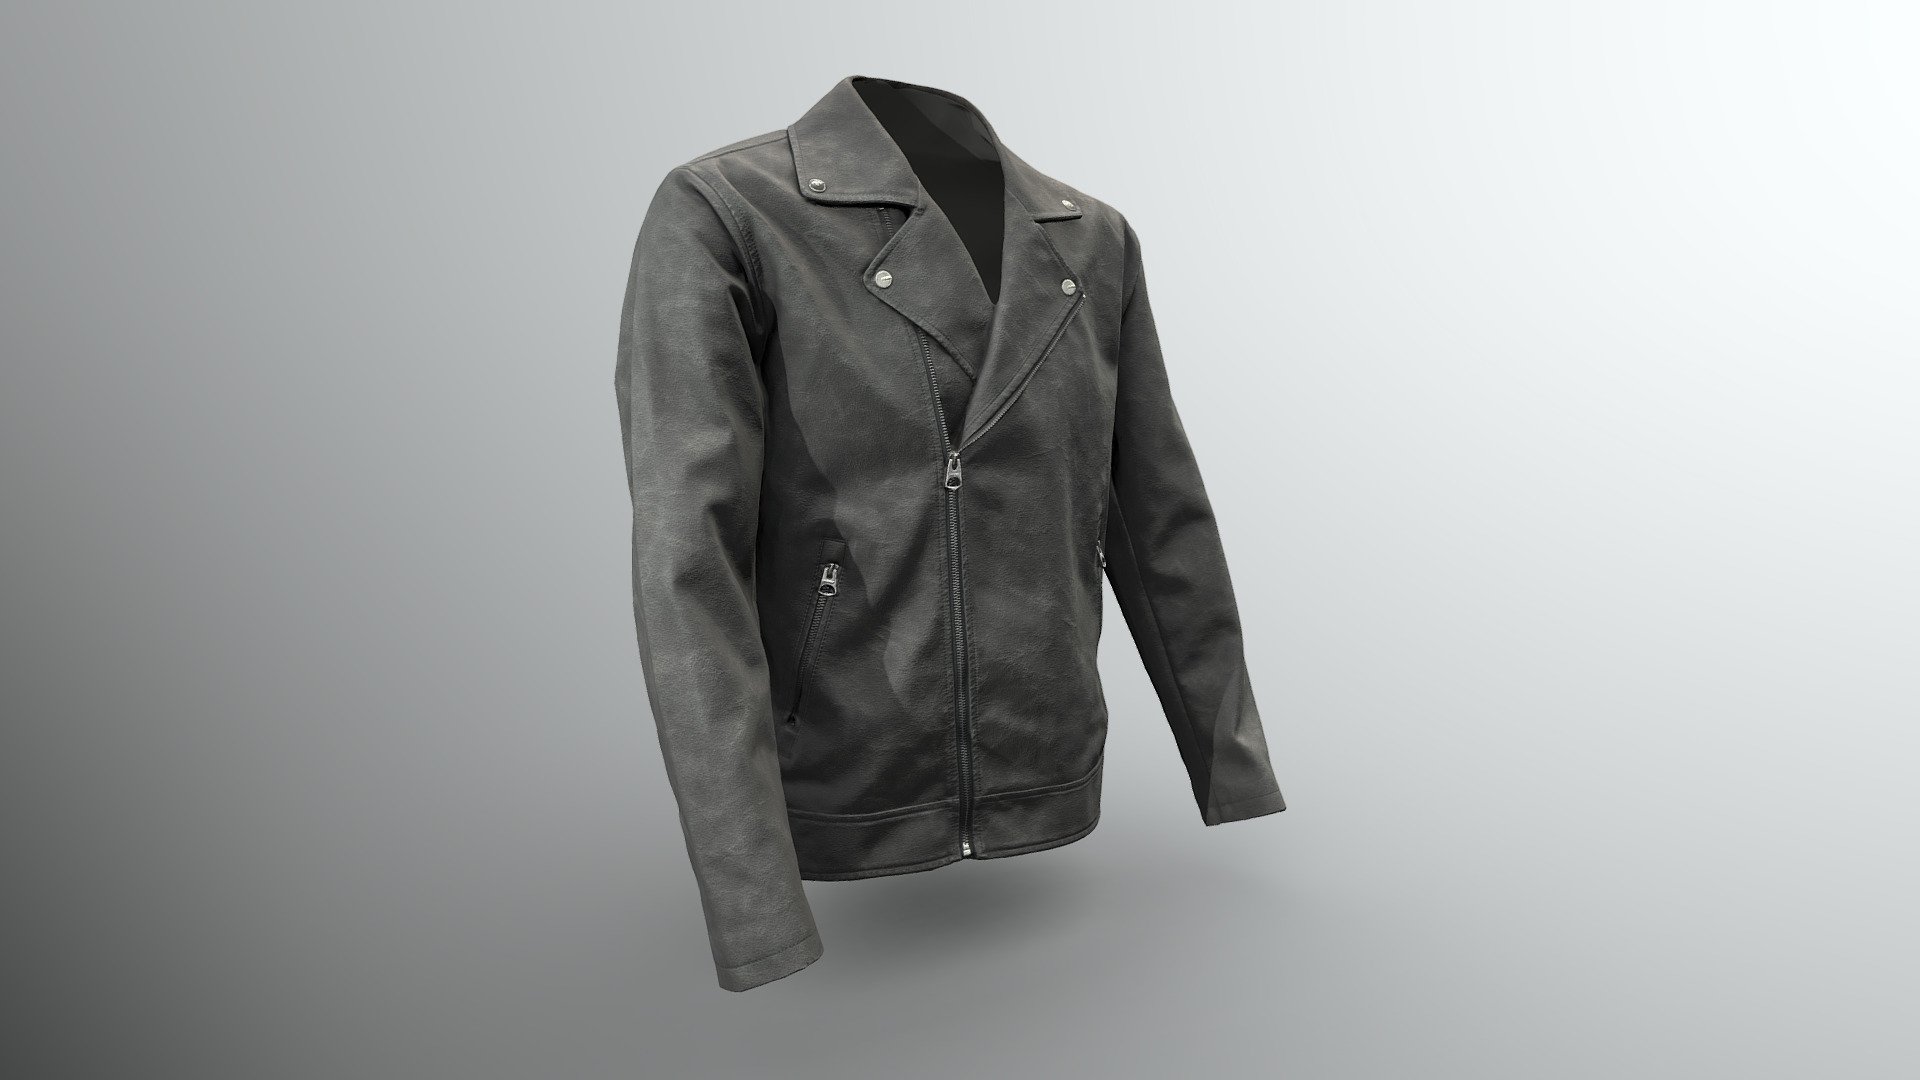 Realistic high detailed jacket model with high resolution textures. 
Model created by our unique semi-automatic scanning technology

Optimized for 3D web and AR / VR

=======FEATURES===========

The units of measurement during the creation process were milimeters.
Clean and optimized topology is used for maximum polygon efficiency. 
This model consists of 1 meshes. 
The model has 2 materials 
Includes high detailed normal map

Includes High detail 4096x4096 .png textures (diffuse (base color), Roughness, Metallness, Normal)
60k polygons - Only Sons ONSWILLIAM BIKER - Faux Leather Jacket - Buy Royalty Free 3D model by VRModelFactory 3d model